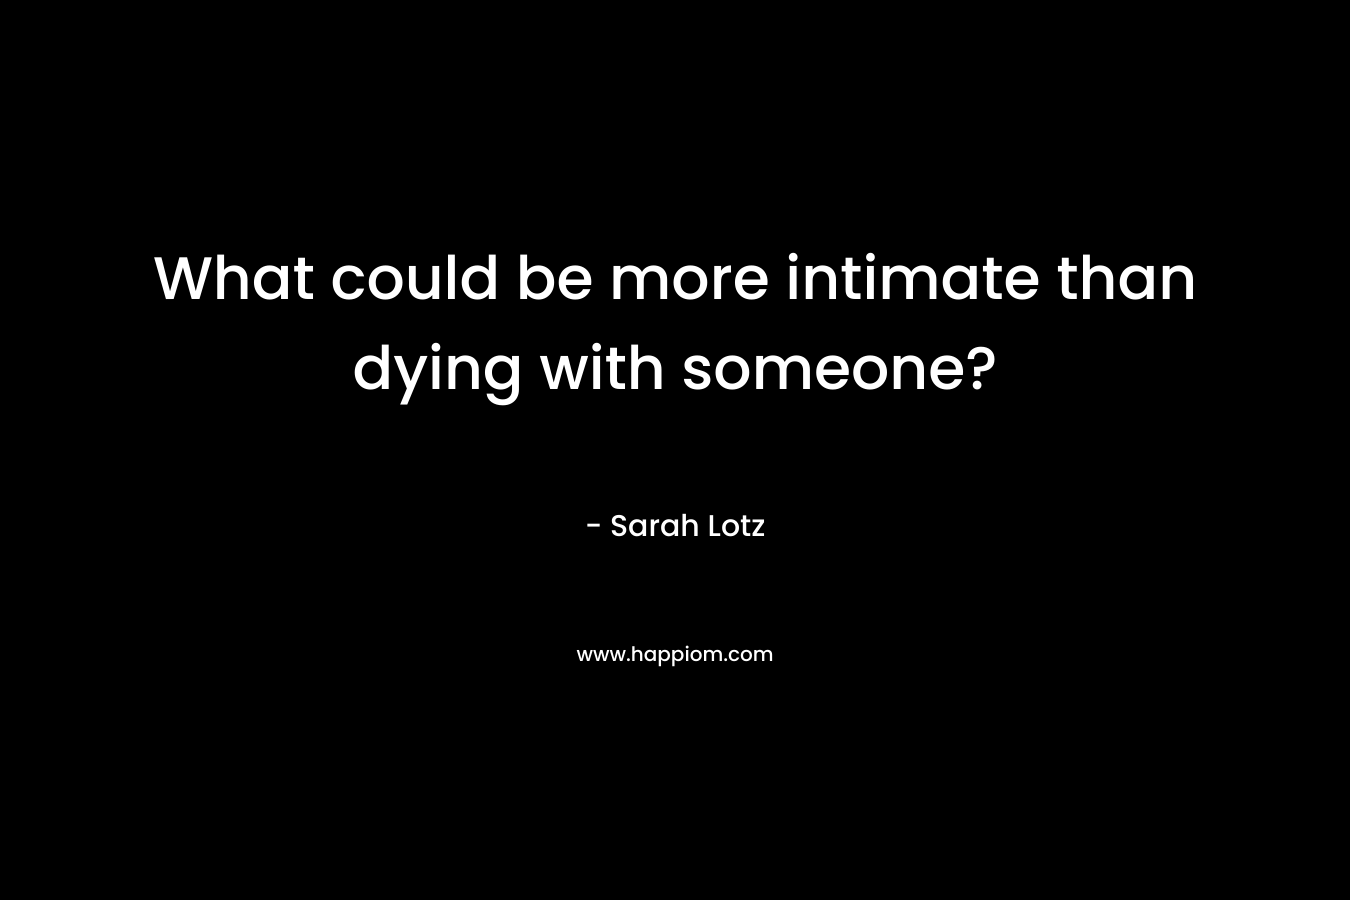 What could be more intimate than dying with someone? – Sarah Lotz